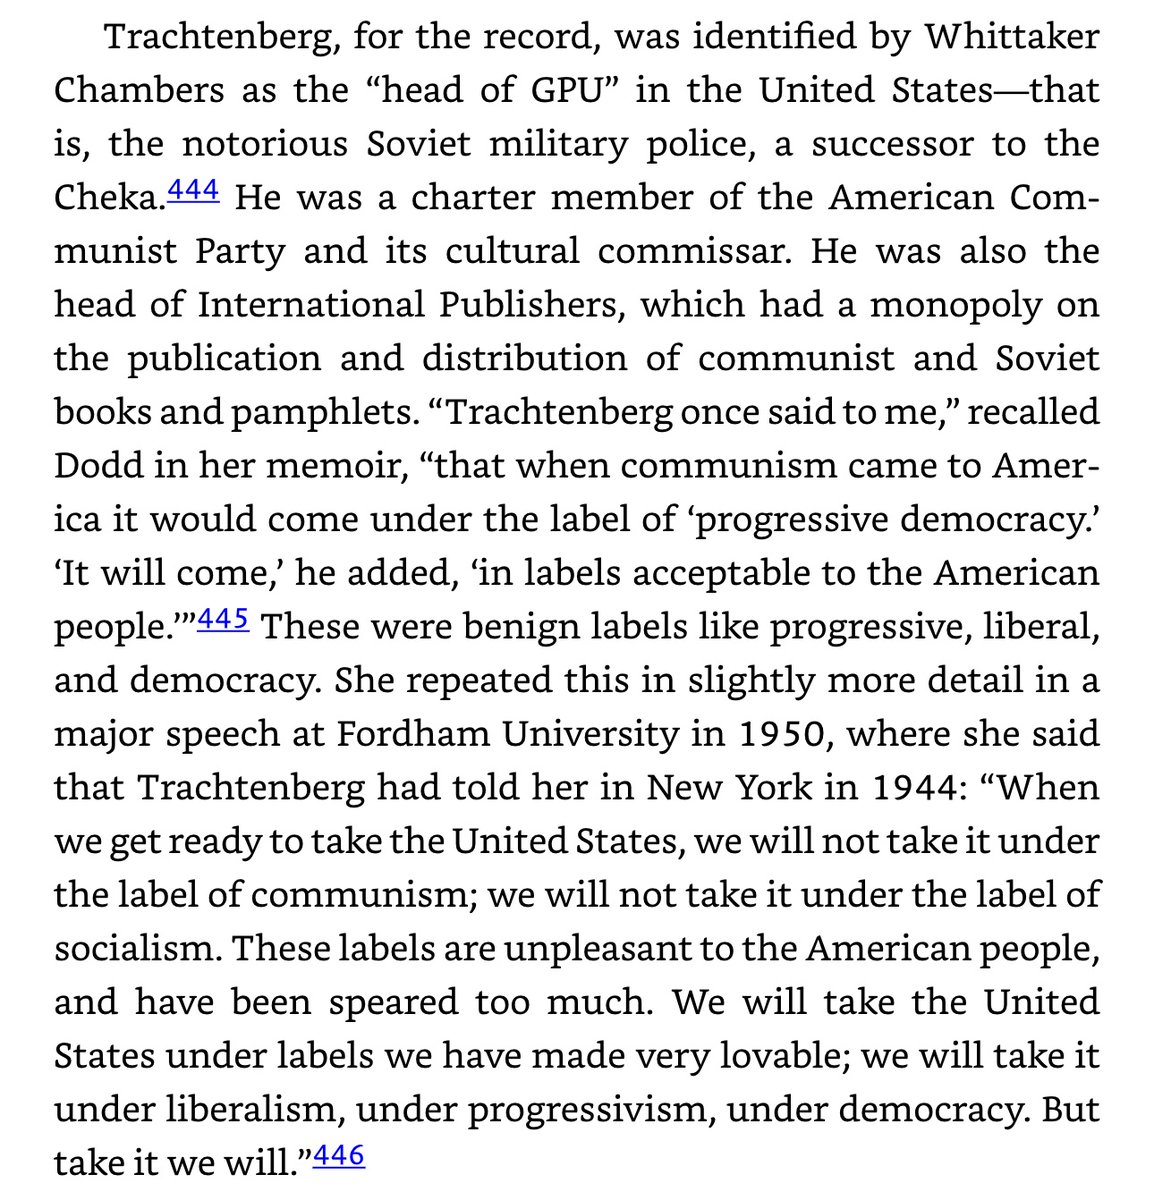 From The Devil and Karl Marx on the communist infiltration of the US: